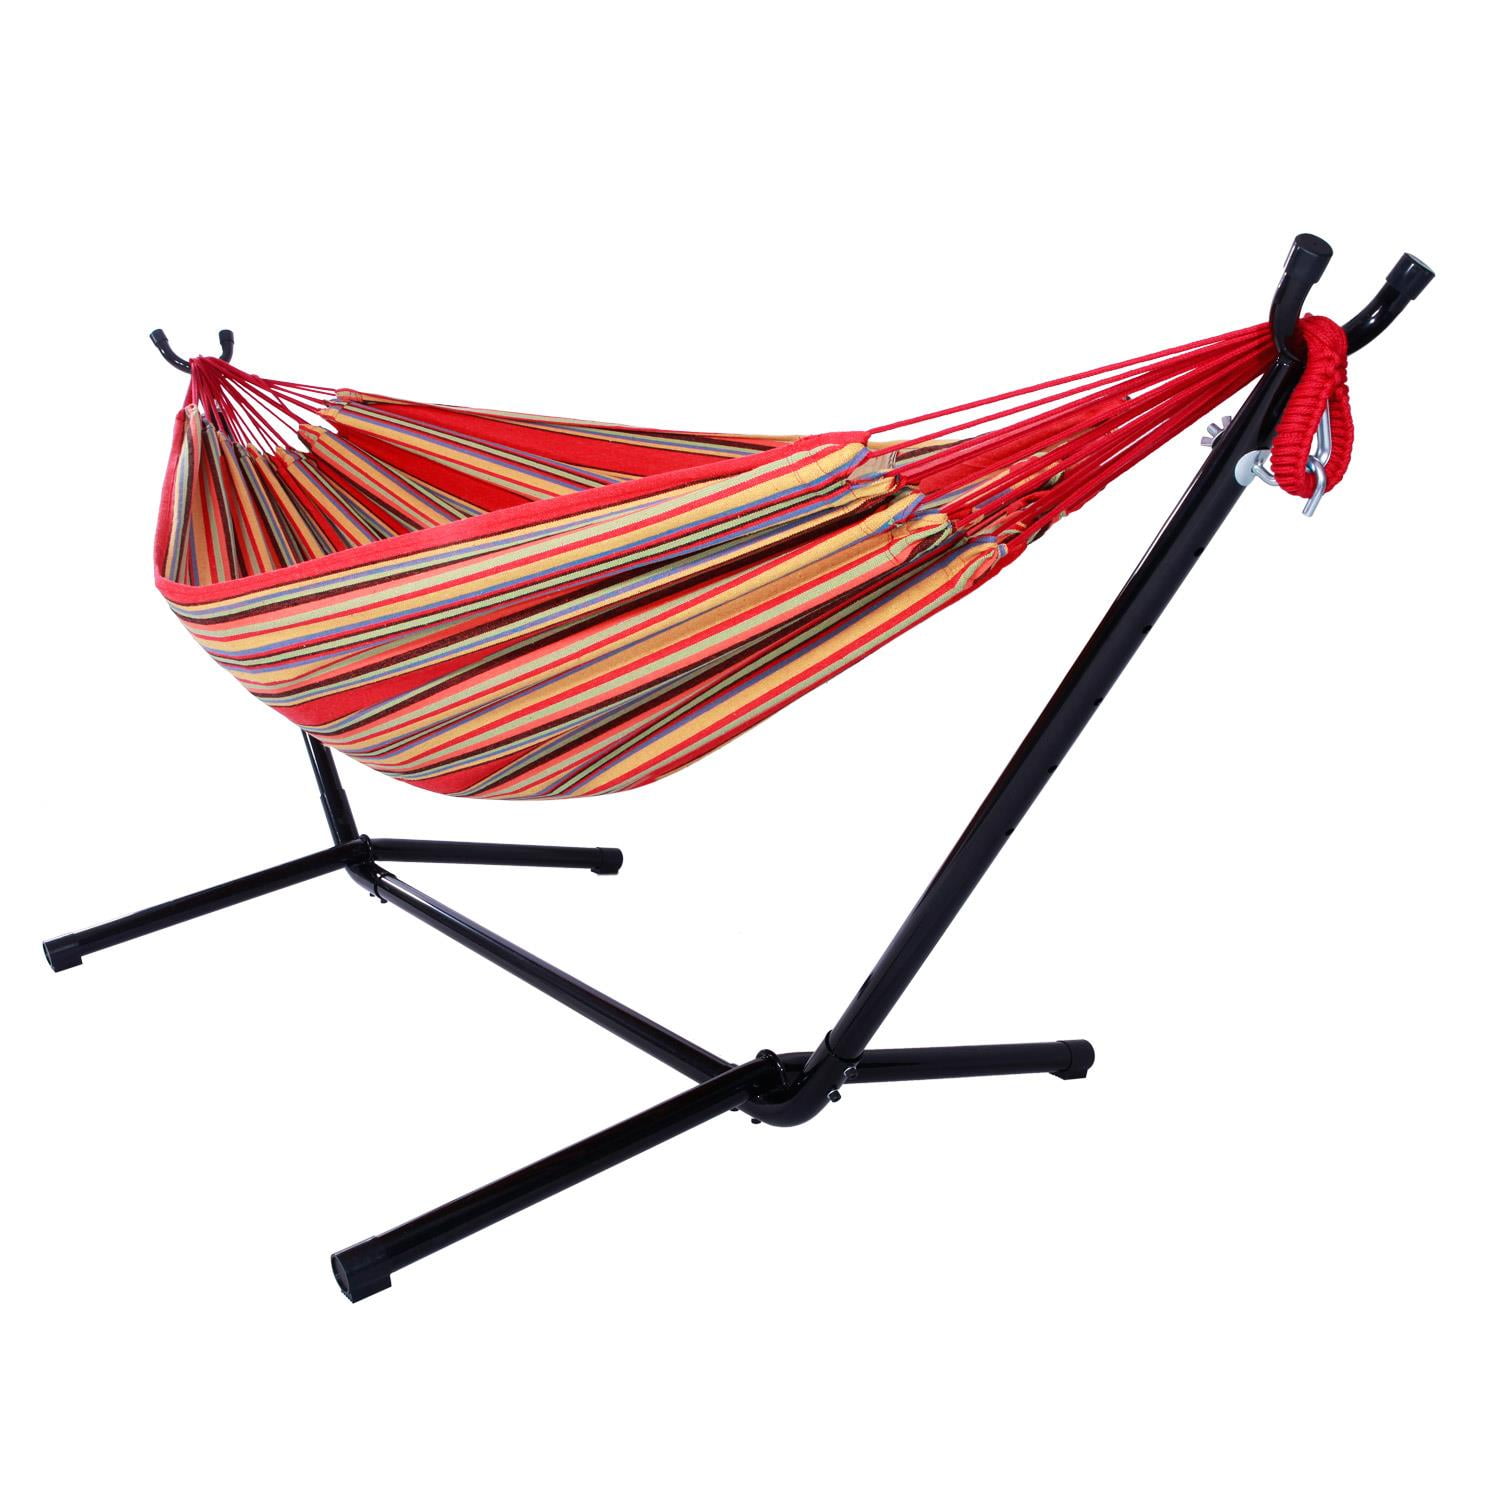 US Double Hammock With Space Saving Steel Stand Includes Portable Carrying Case 